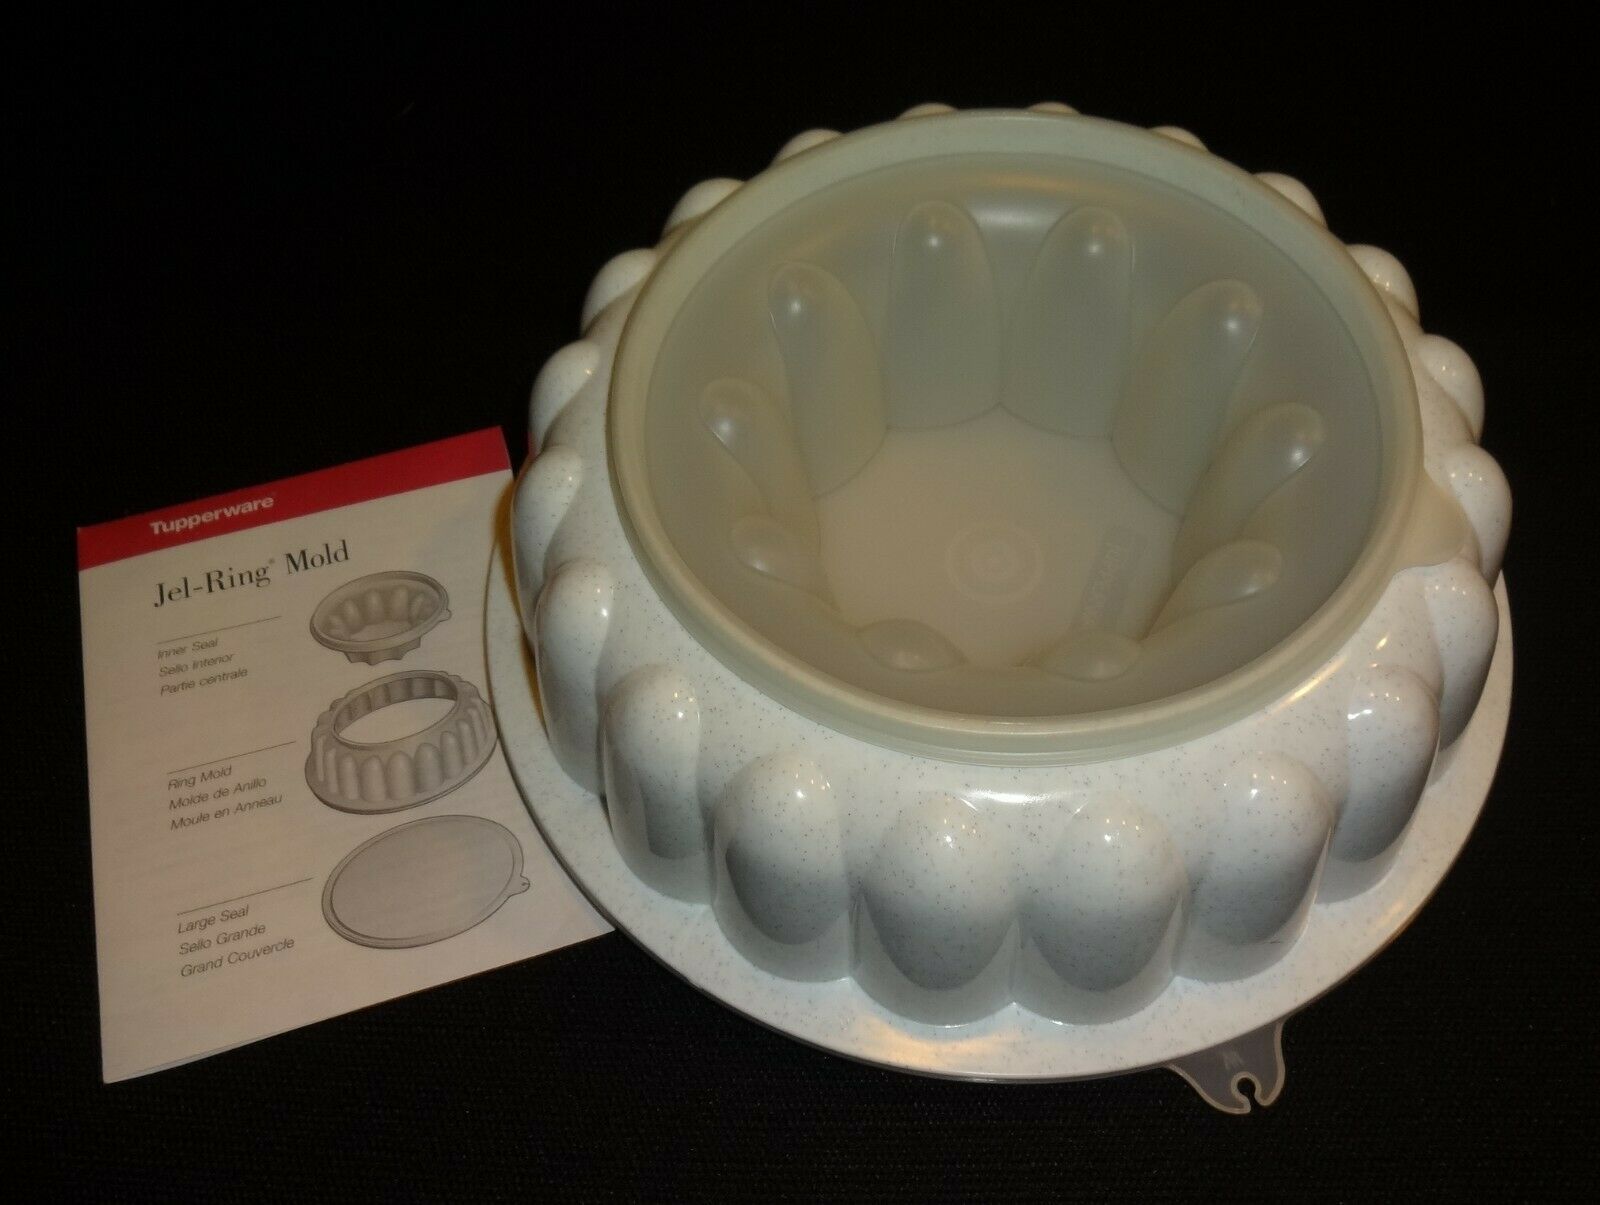 New Tupperware 3 Piece Speckled White Fluted Jel-ring Mold